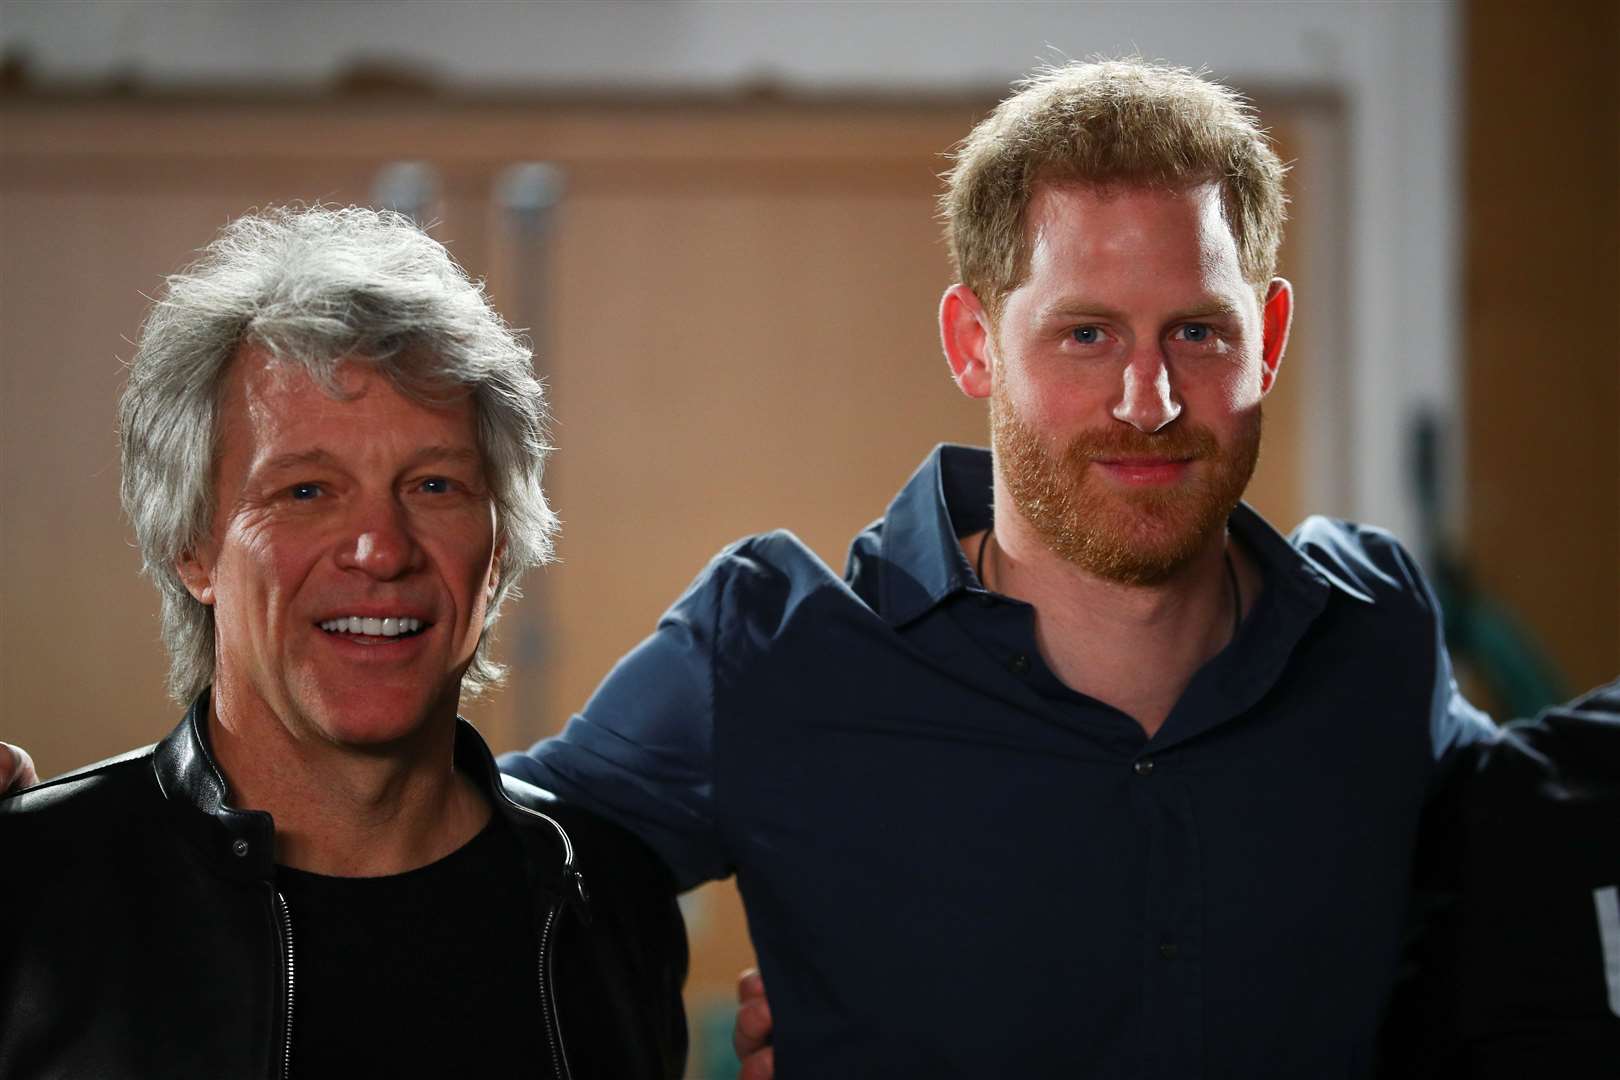 The Duke of Sussex meets Jon Bon Jovi during his visit Abbey Road Studios in London in 2020 (Hannah McKay/PA)